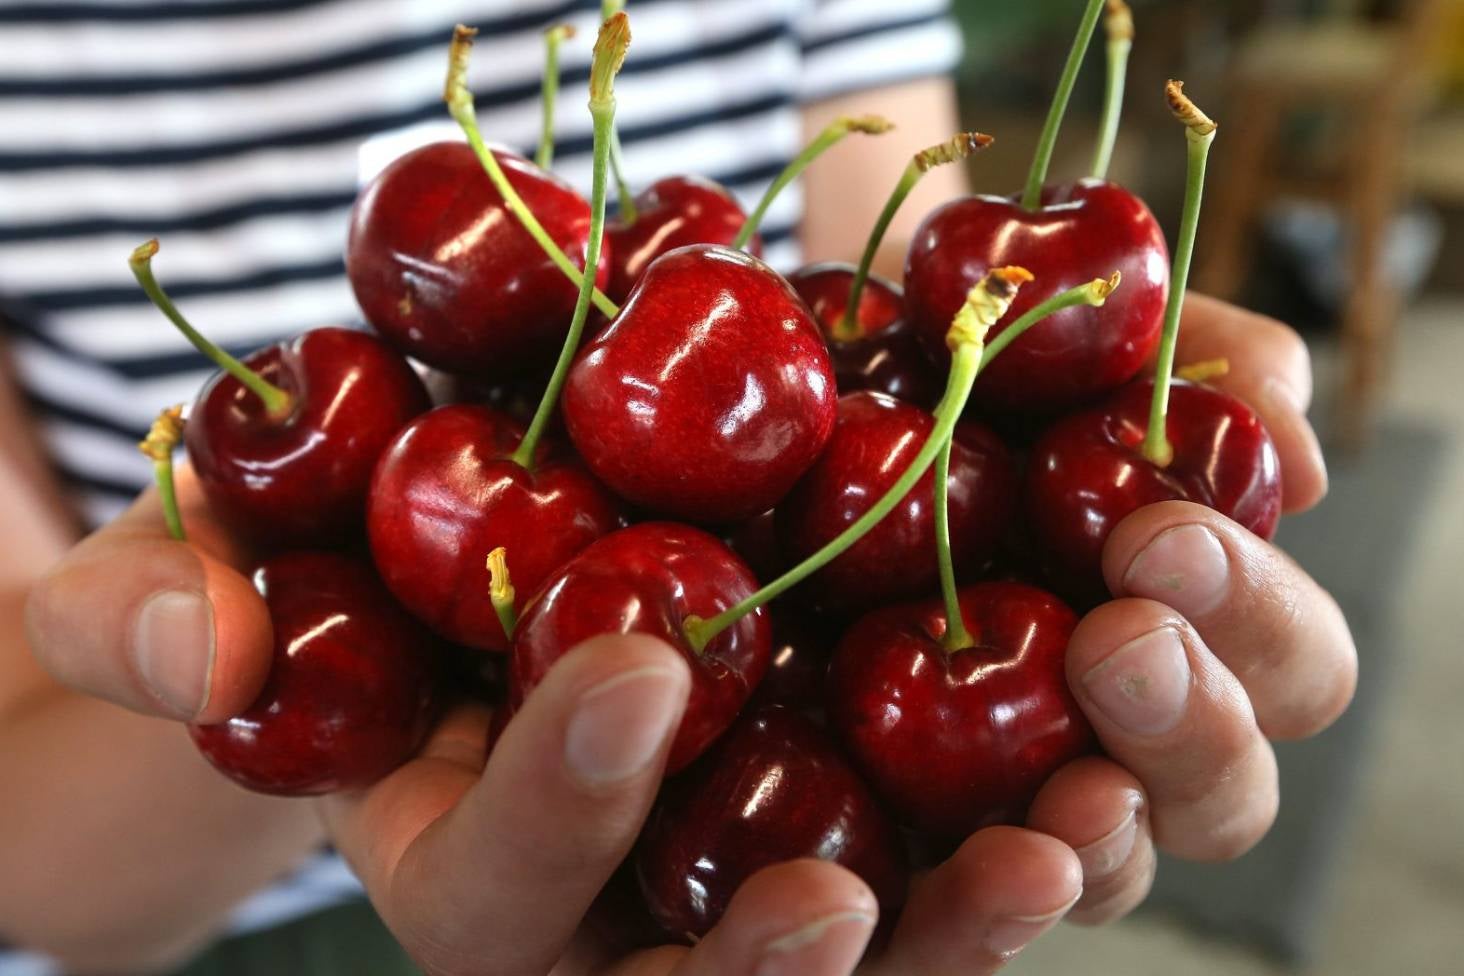 Woman Eats 50 Cherries in Few Hours, Experiences "Blood-Coloured" Poop & Faints in Toilet - WORLD OF BUZZ 1